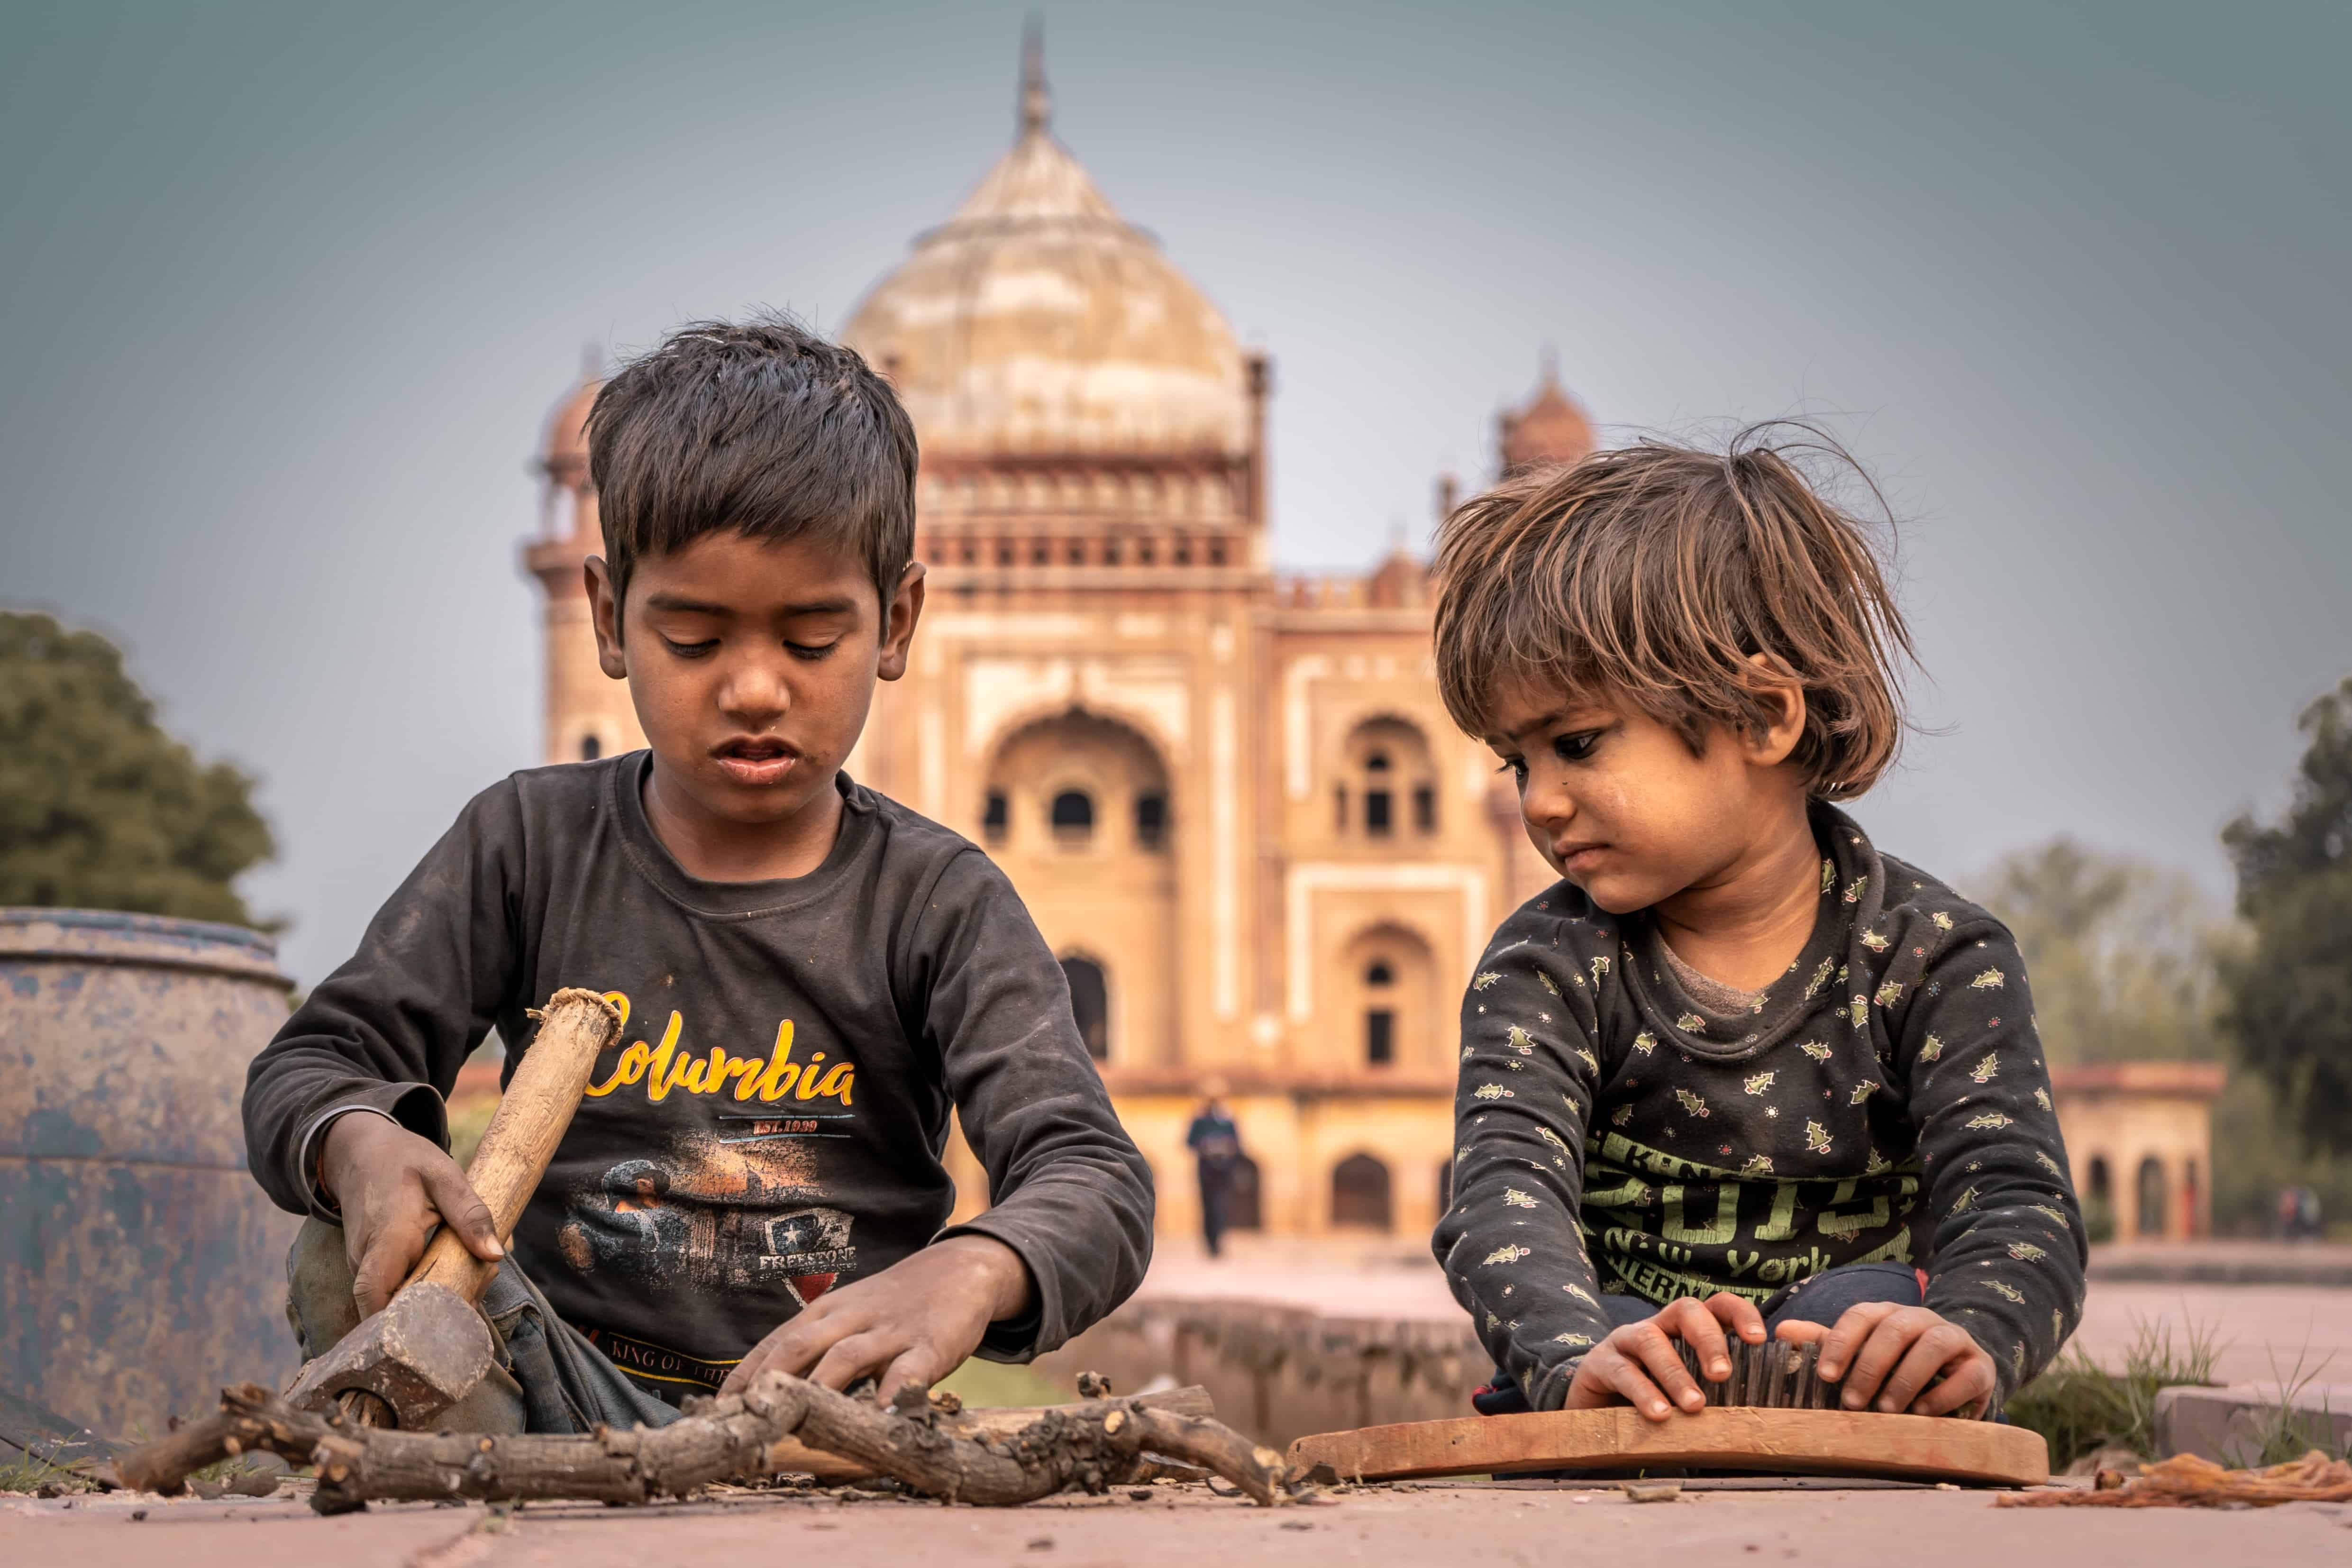 Two boys play in front of a temple